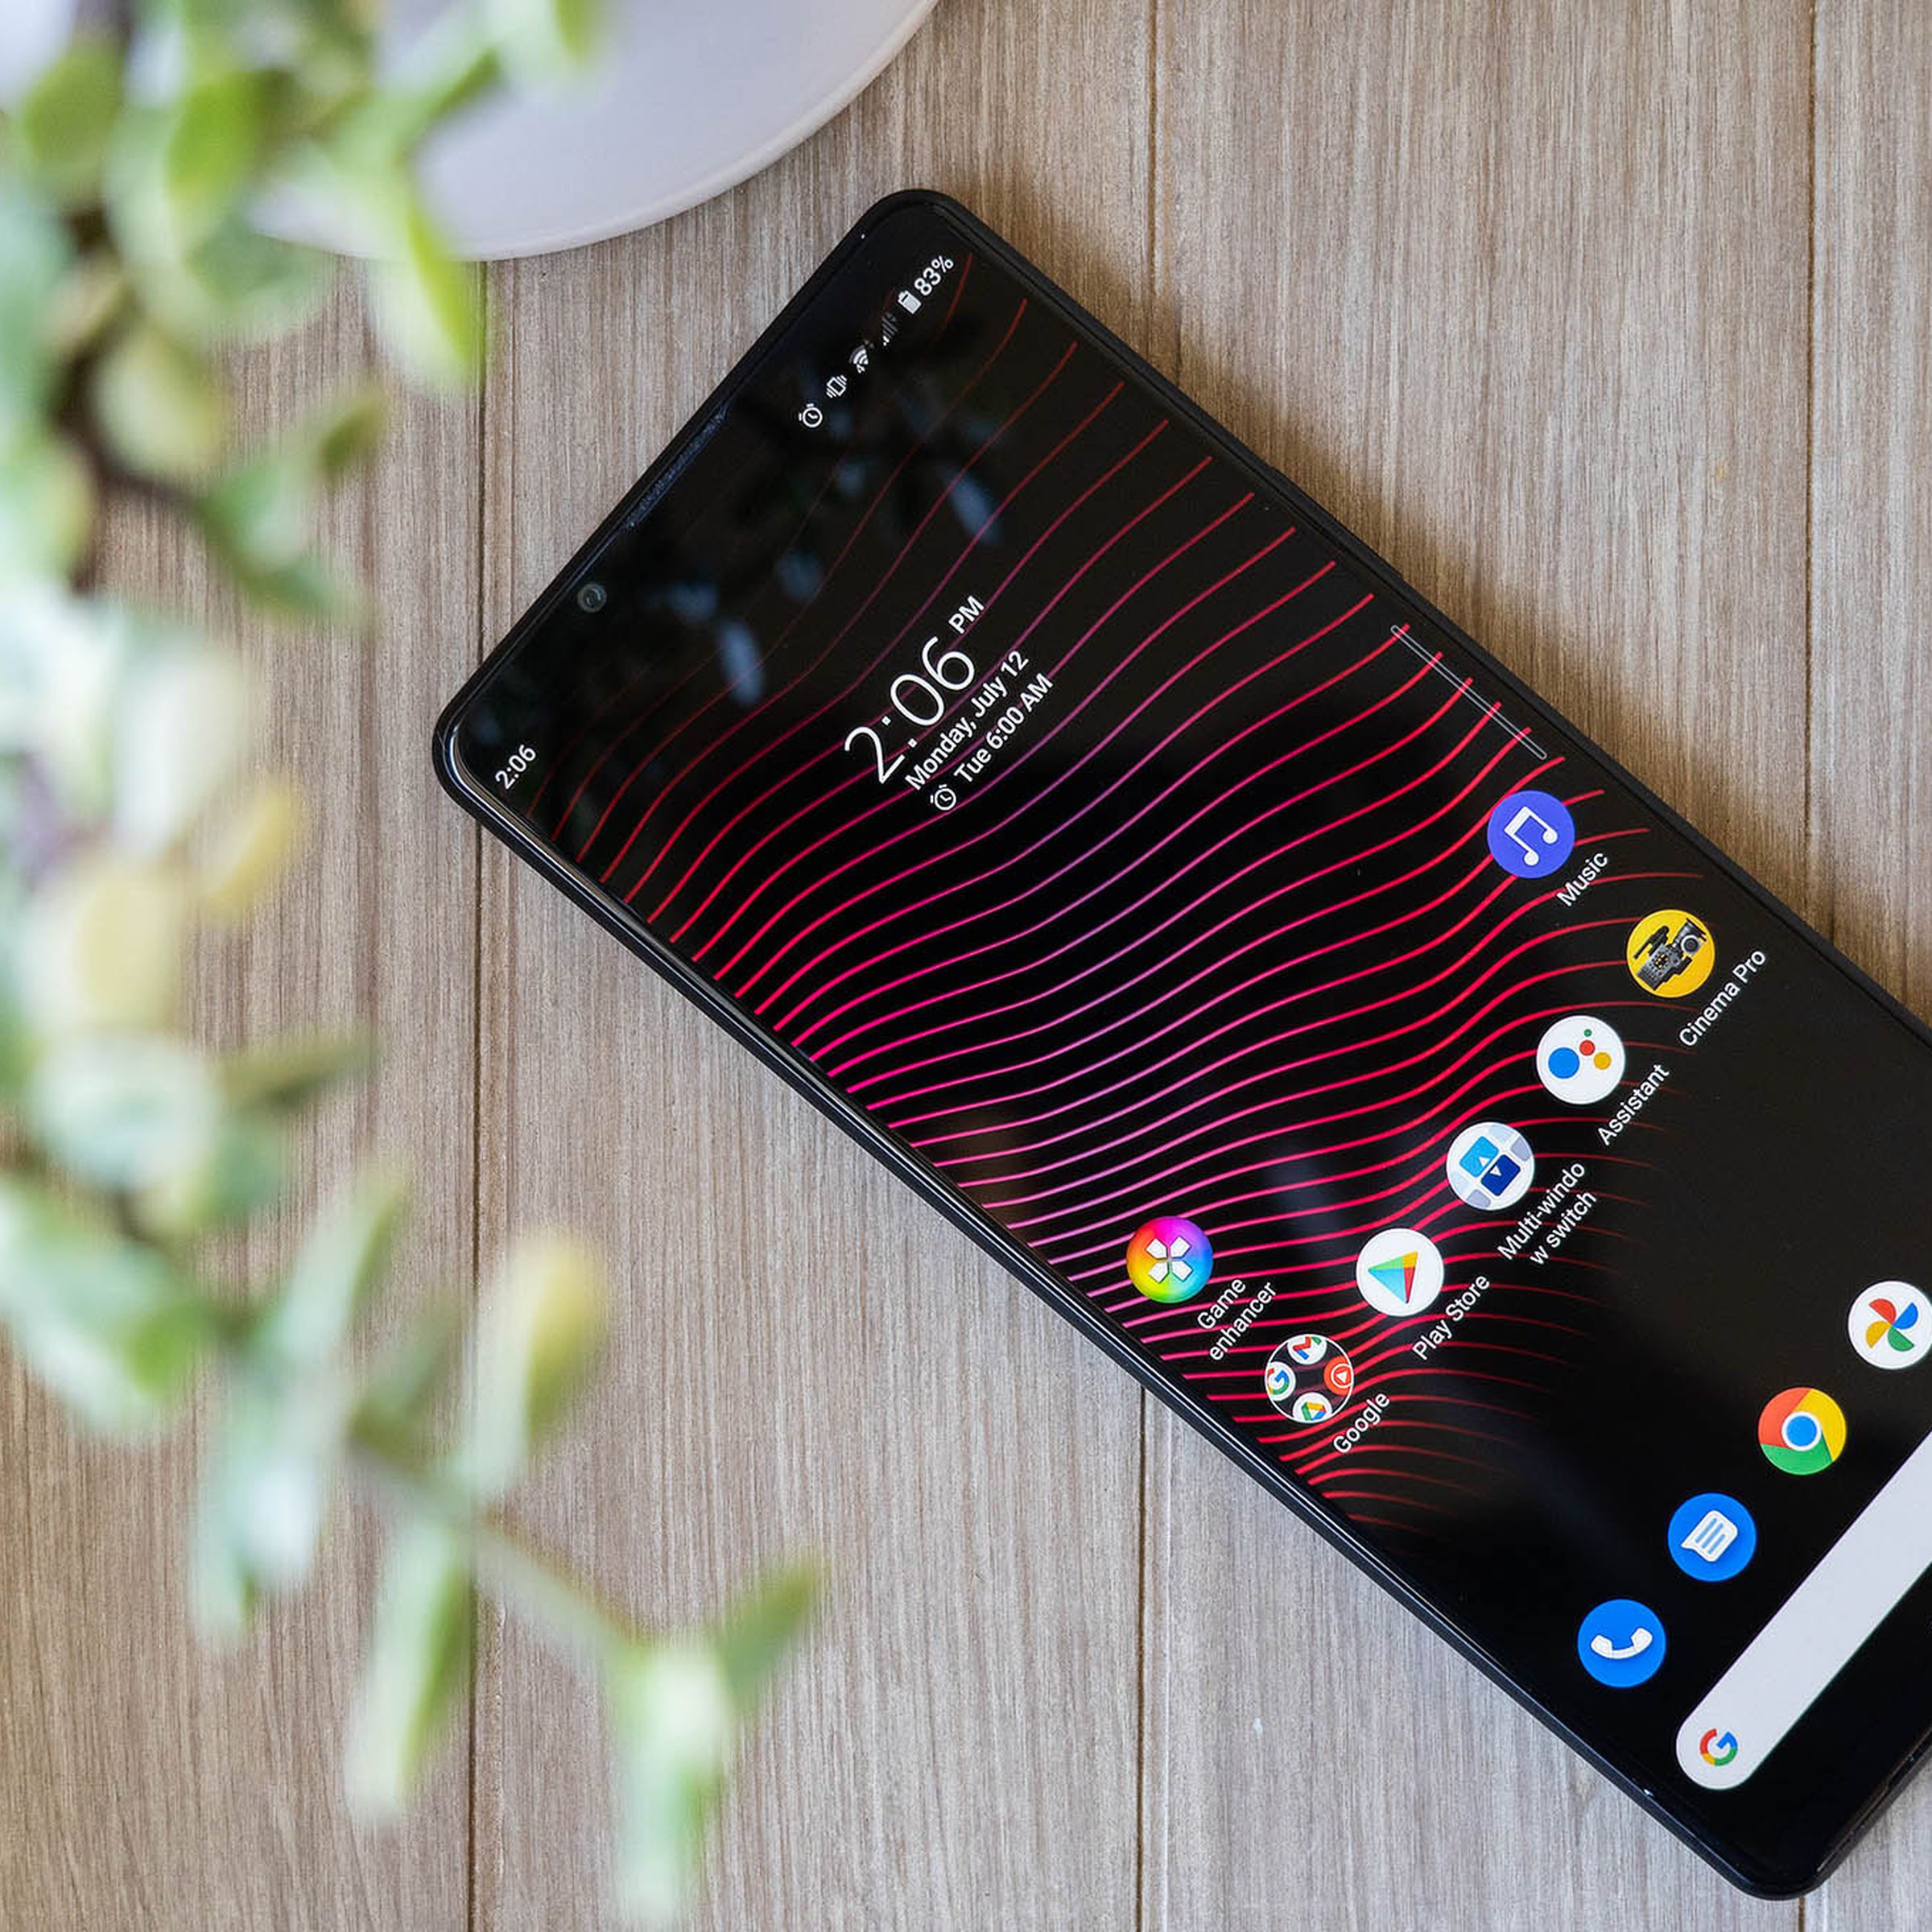 The Xperia 1 III doesn’t offer enough above and beyond the established flagships to justify its high cost.